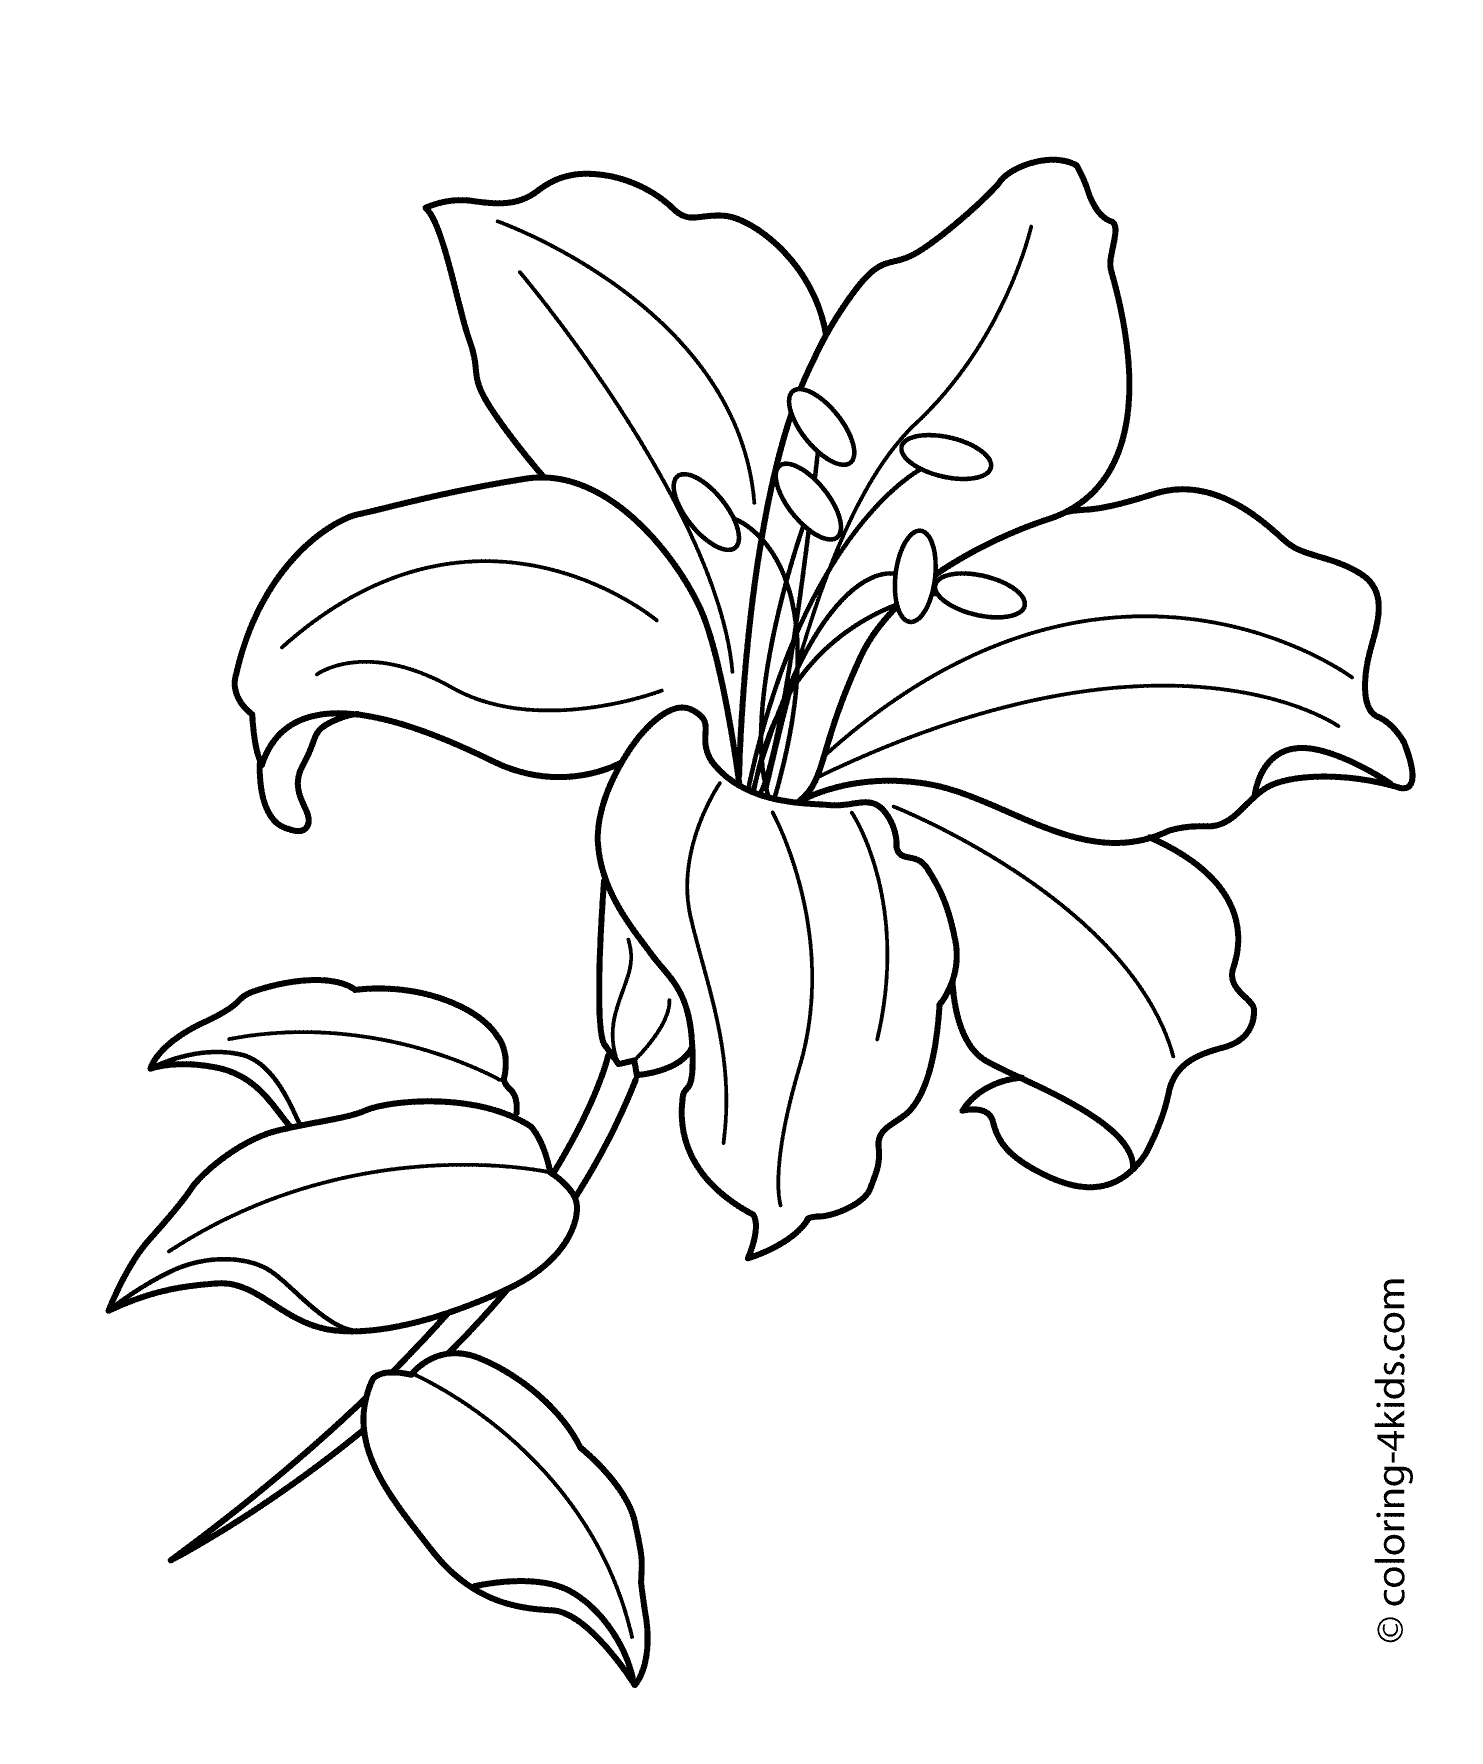 Lilium flower coloring pages for kids, printable free | Flower line  drawings, Lilies drawing, Flower drawing